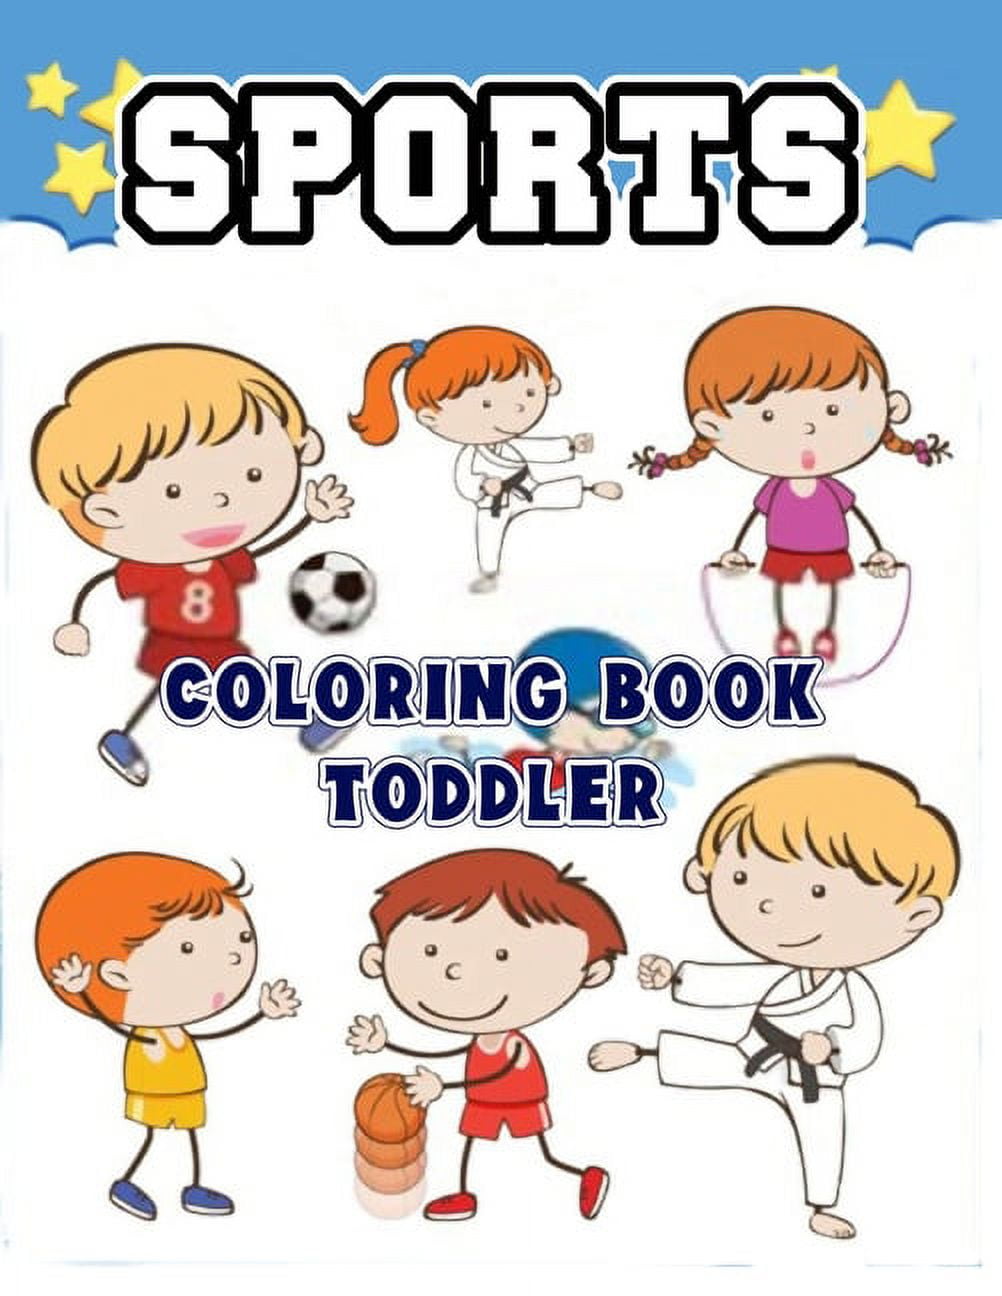 Sports Coloring Books For Kids Ages 8-12: Includes Basketball, Football,  Basebal